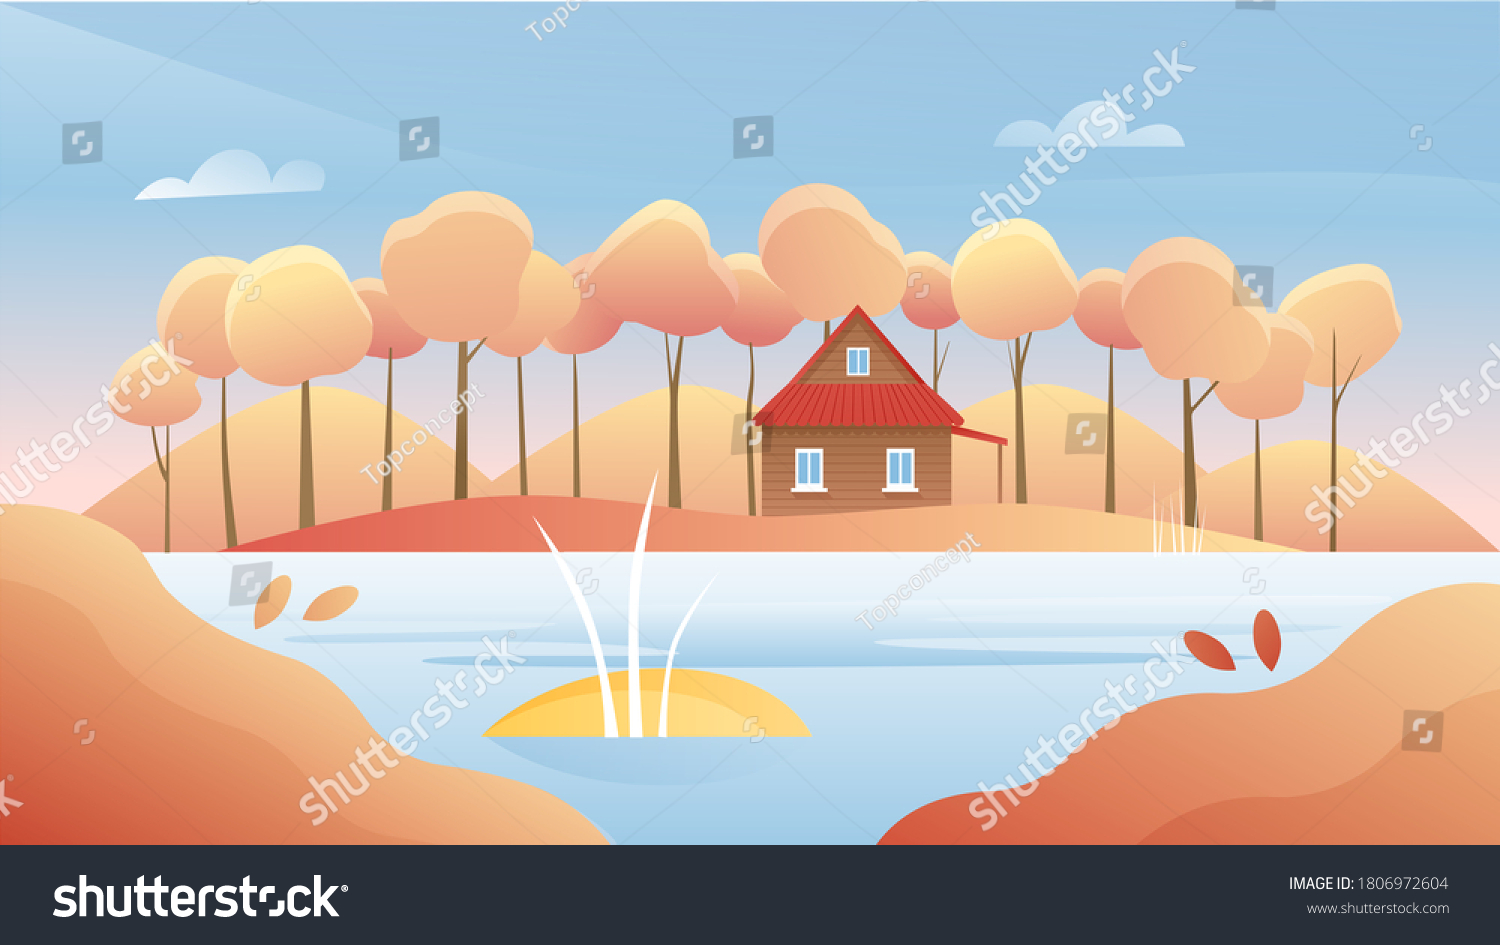 Autumn river landscape vector illustration. Cartoon flat autumnal sunny day, panorama nature woodland scenery with forest trees, rural wooden house on riverbank, fall season scenic woods background